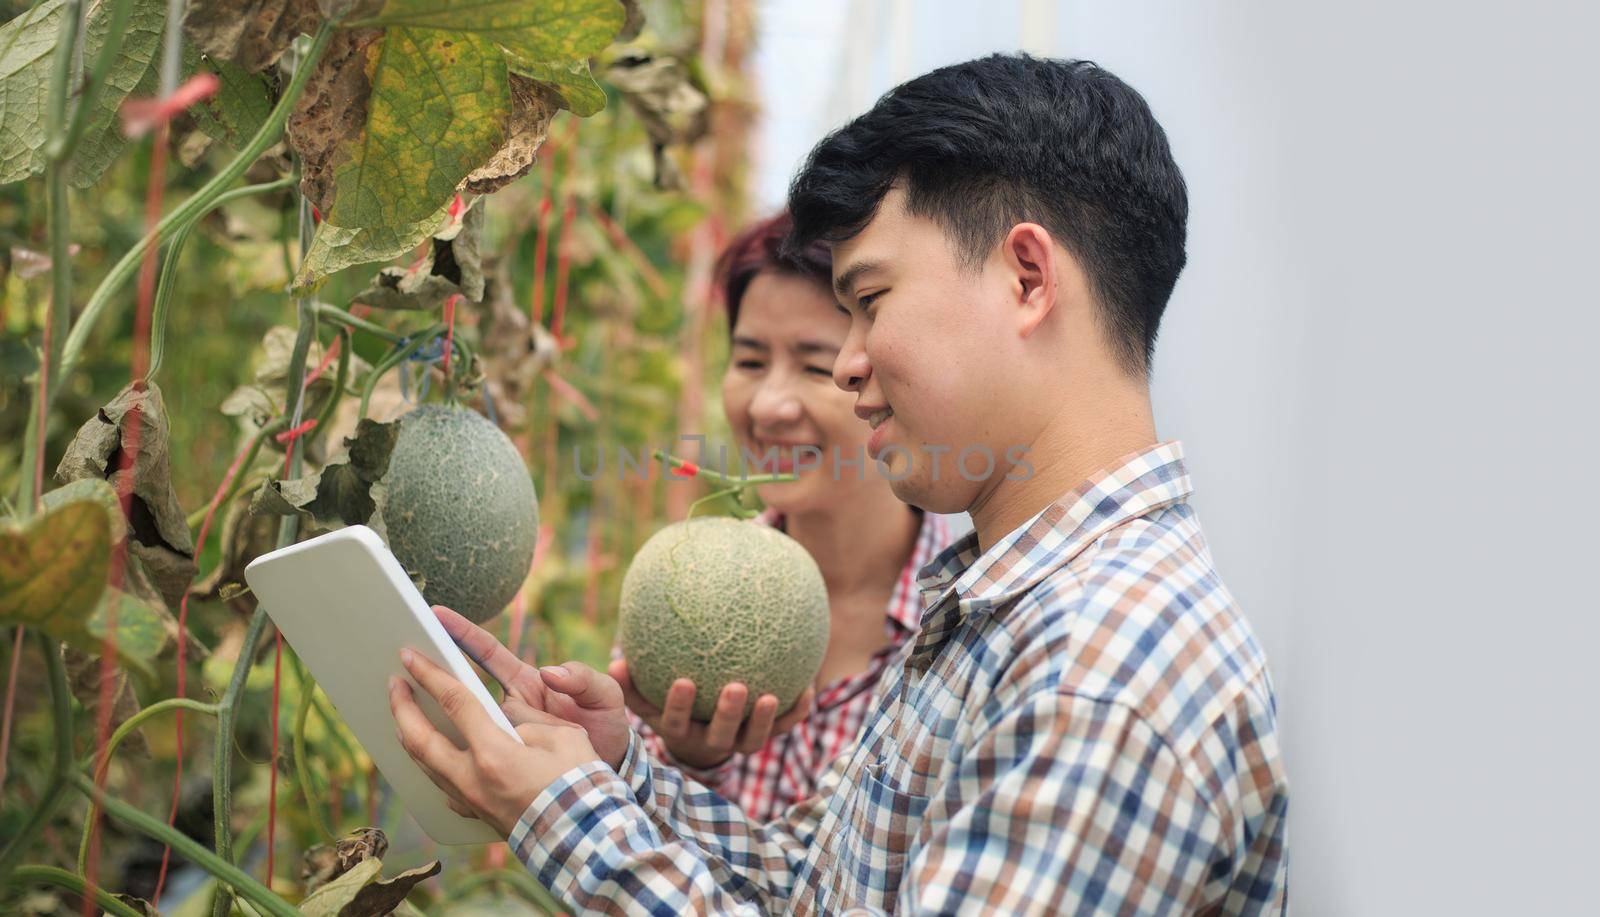 Farmers using tablet computer check the damaging diseases in melons leaves infected by downy mildew by toa55